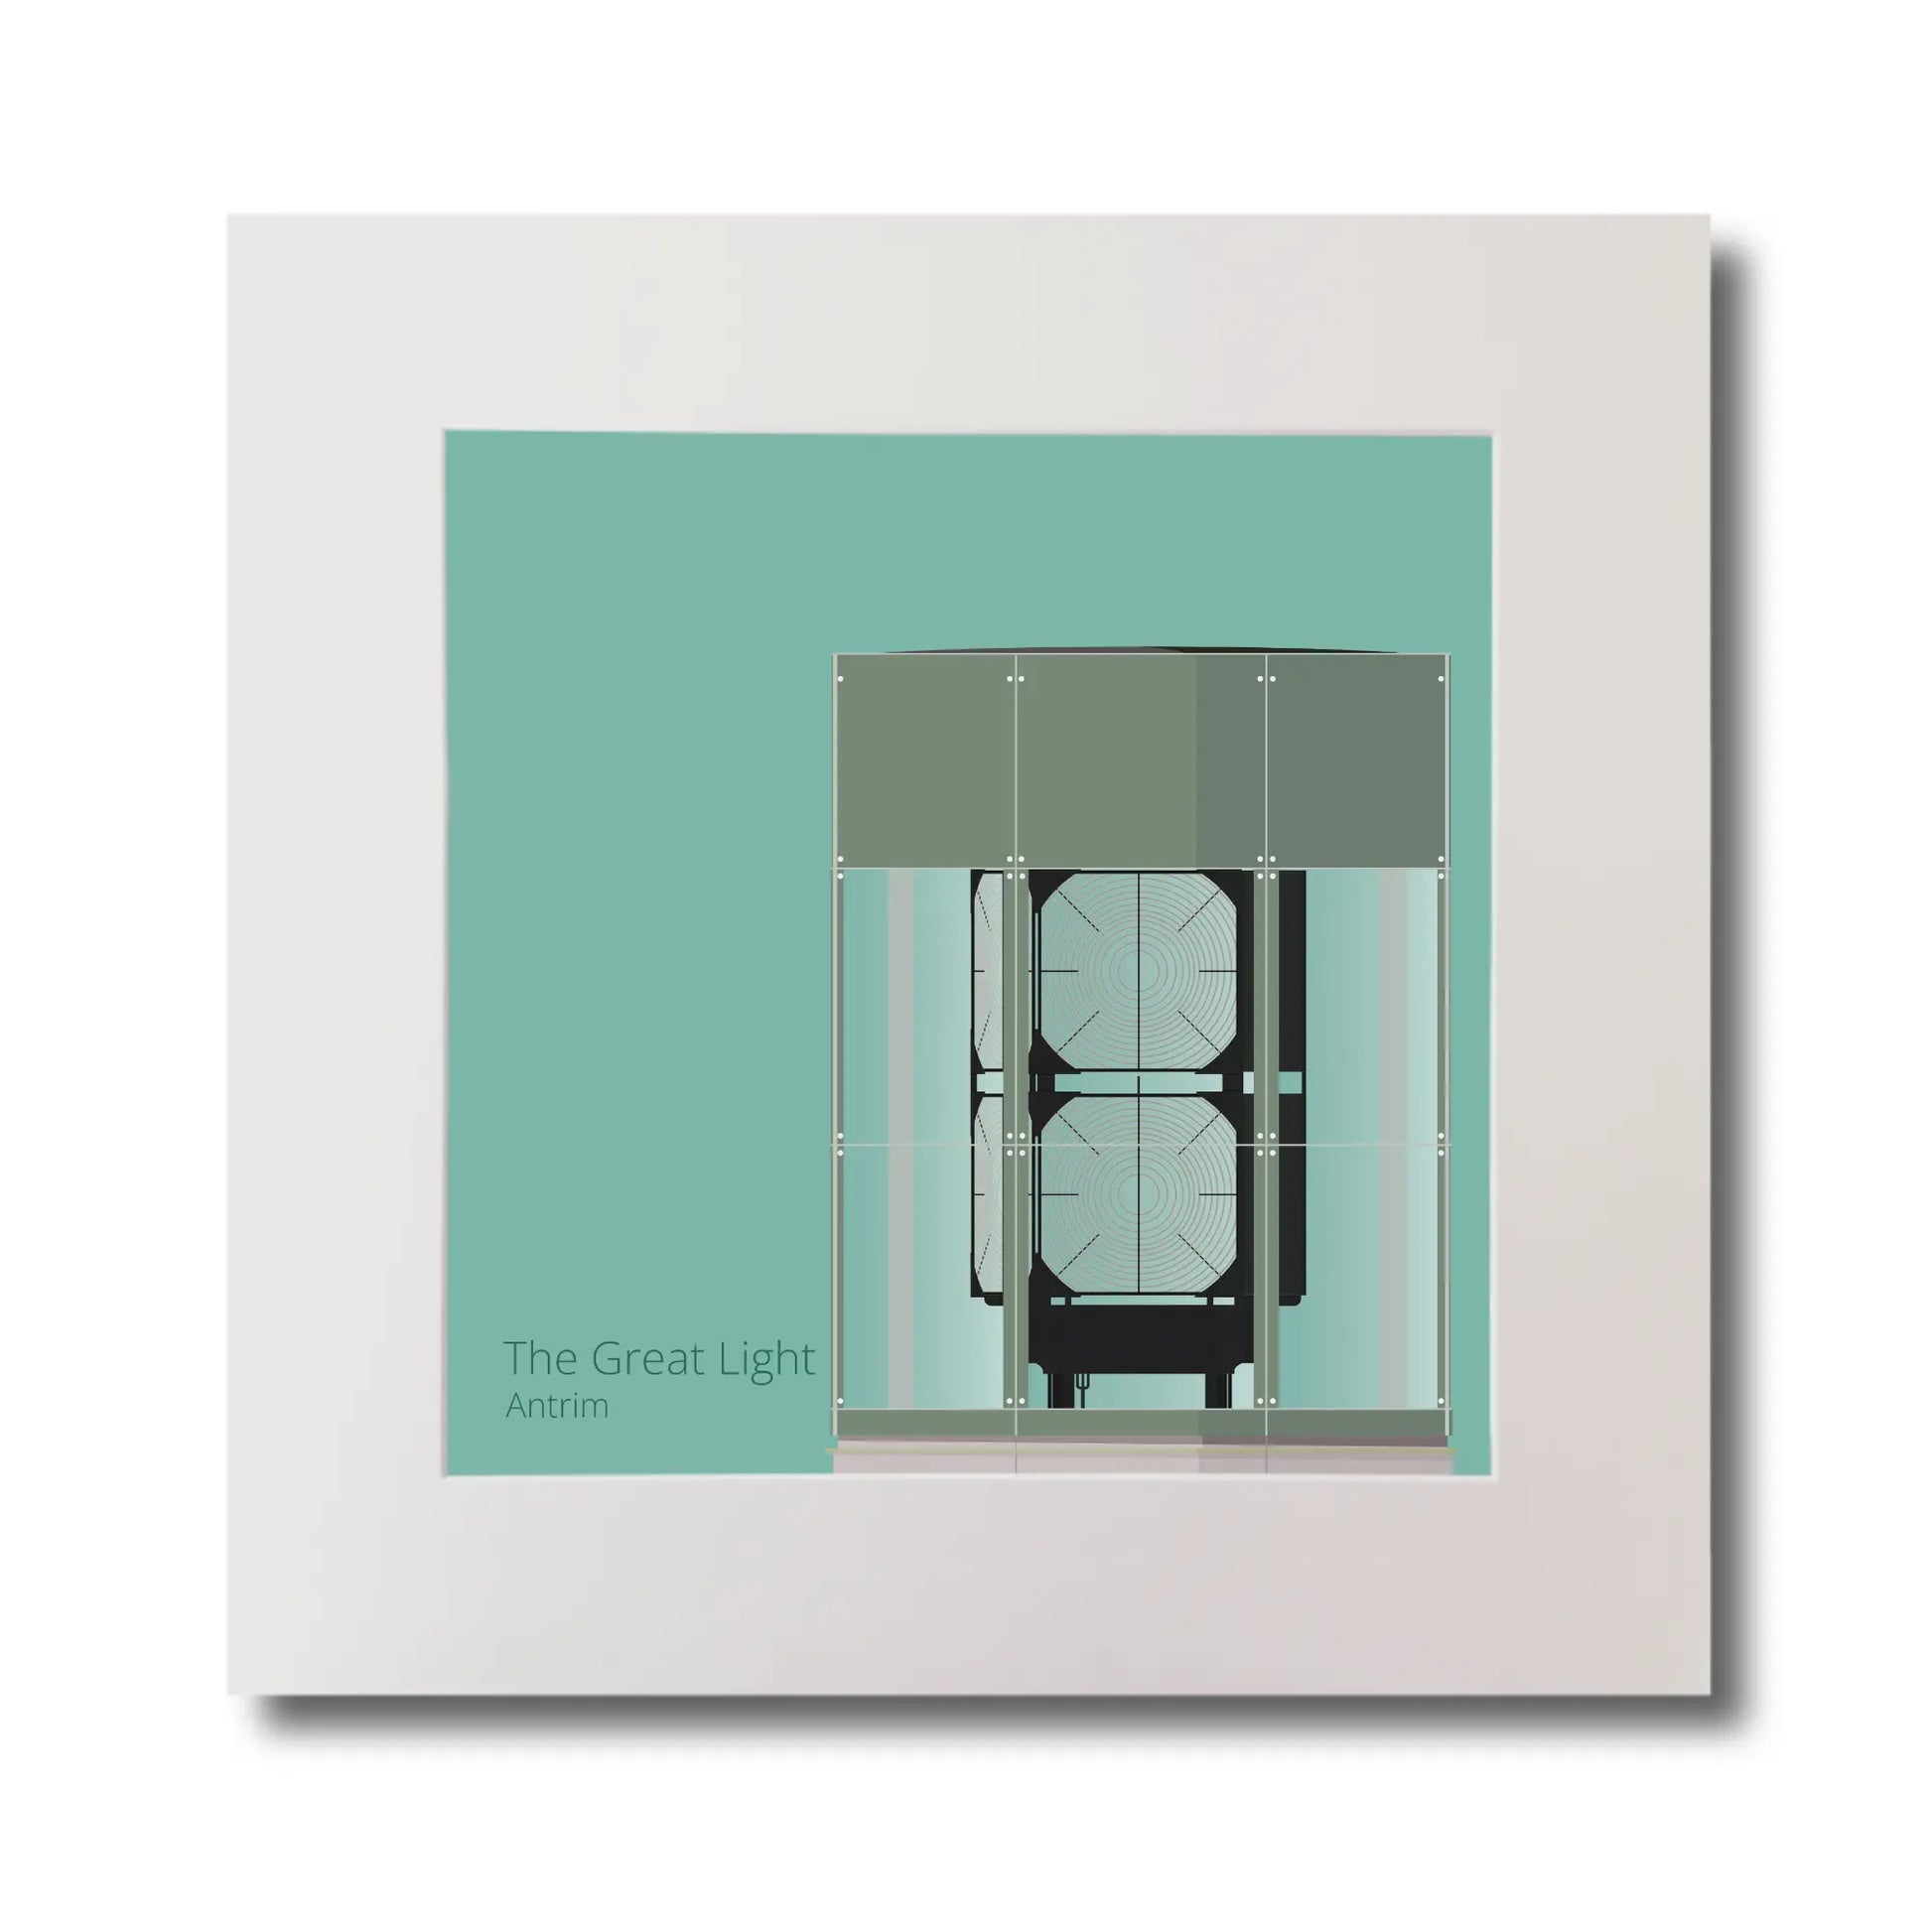 Illustration  The Great Light lighthouse on an ocean green background, mounted and measuring 30x30cm.